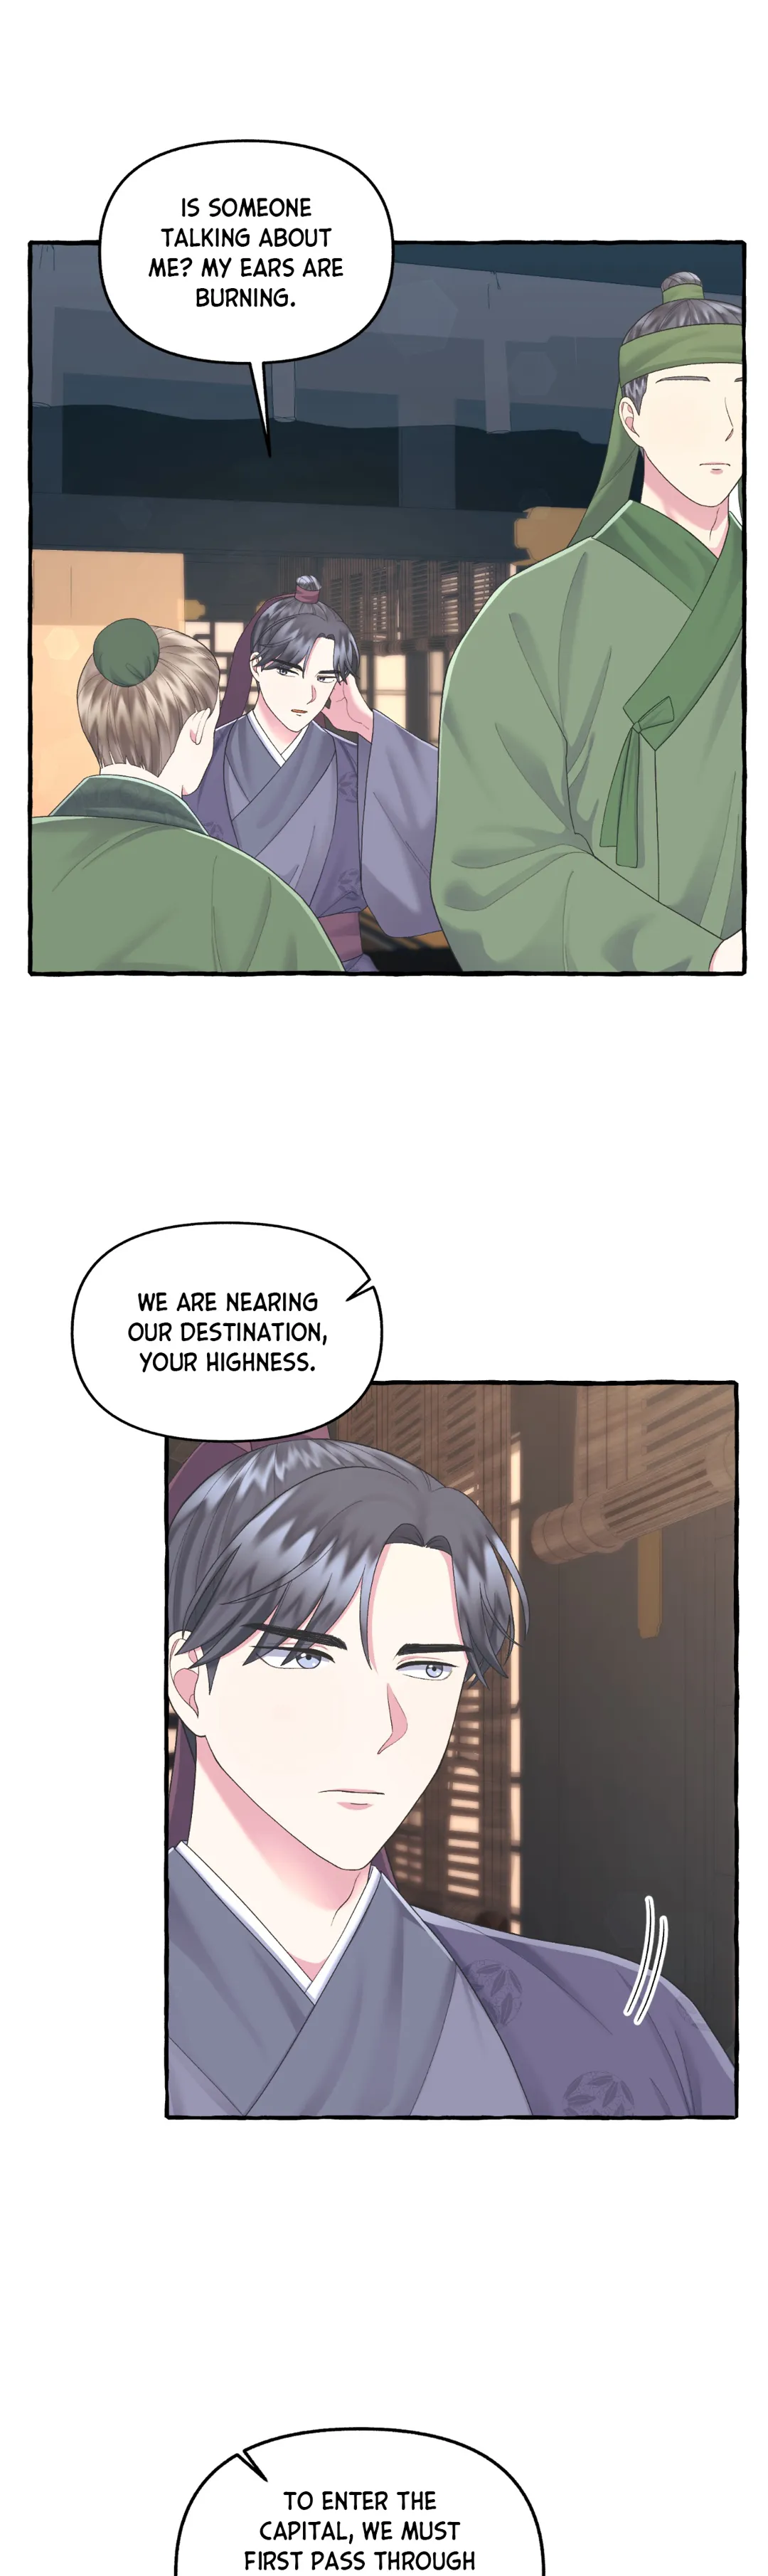 Cheer Up, Your Highness! chapter 25